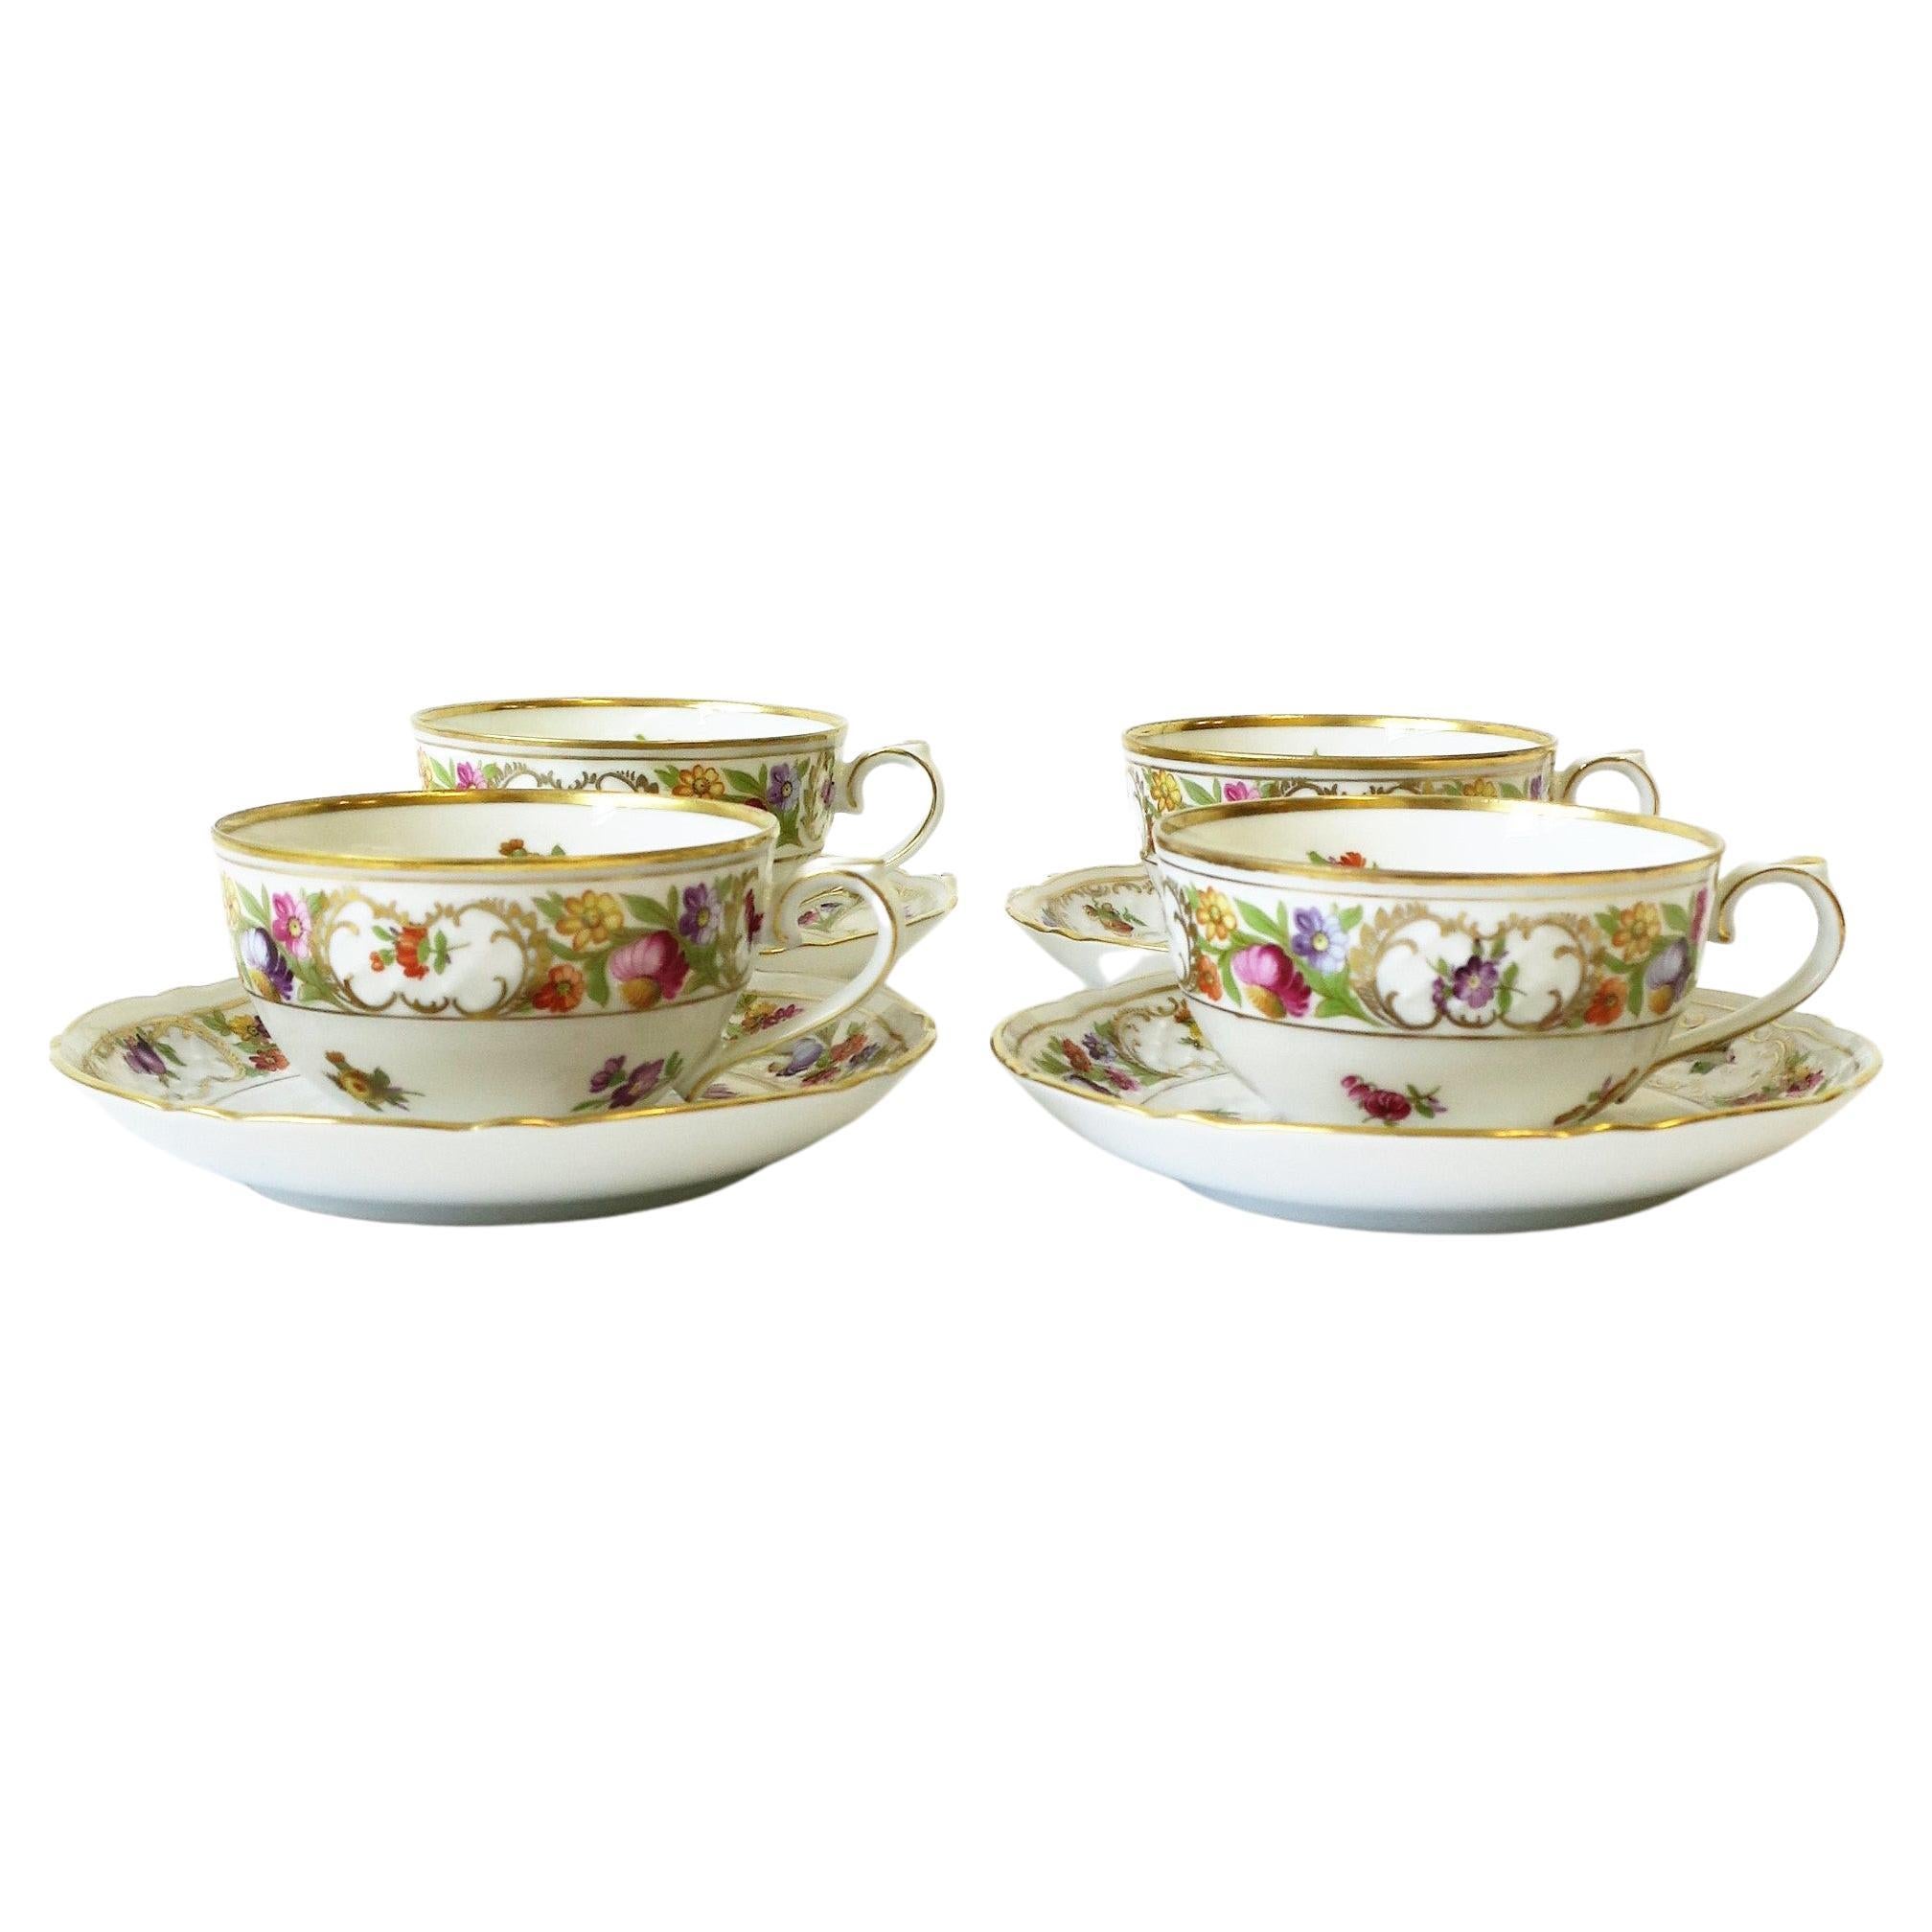 German Porcelain Coffee or Tea Cup and Saucer, Set of 4